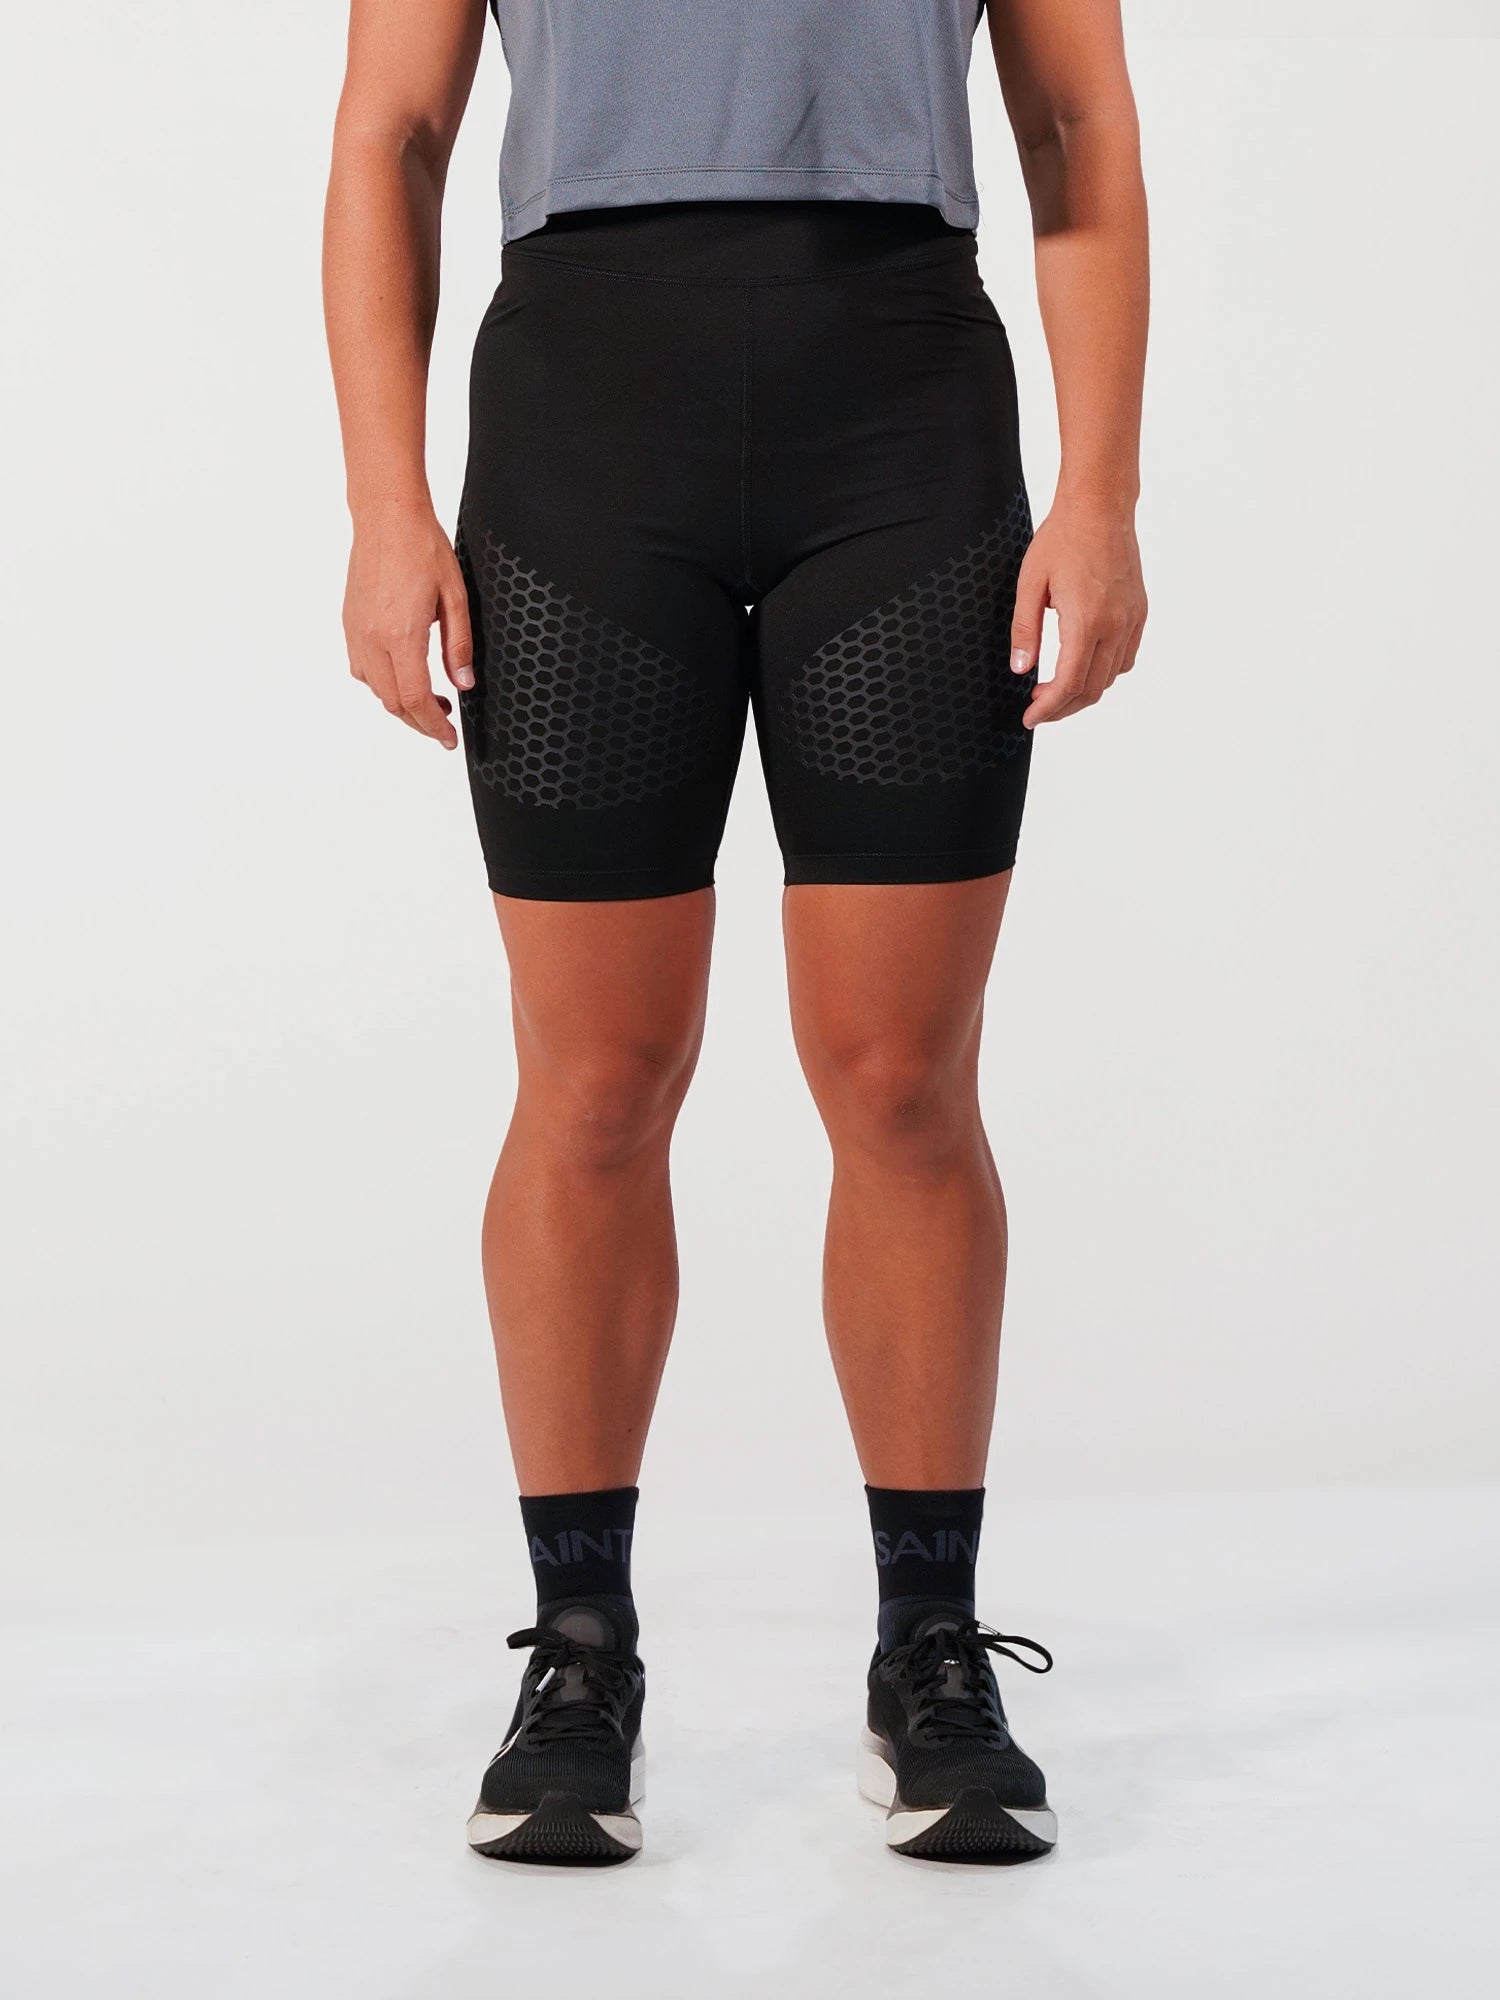 Women's ¾ Performance Compression Shorts